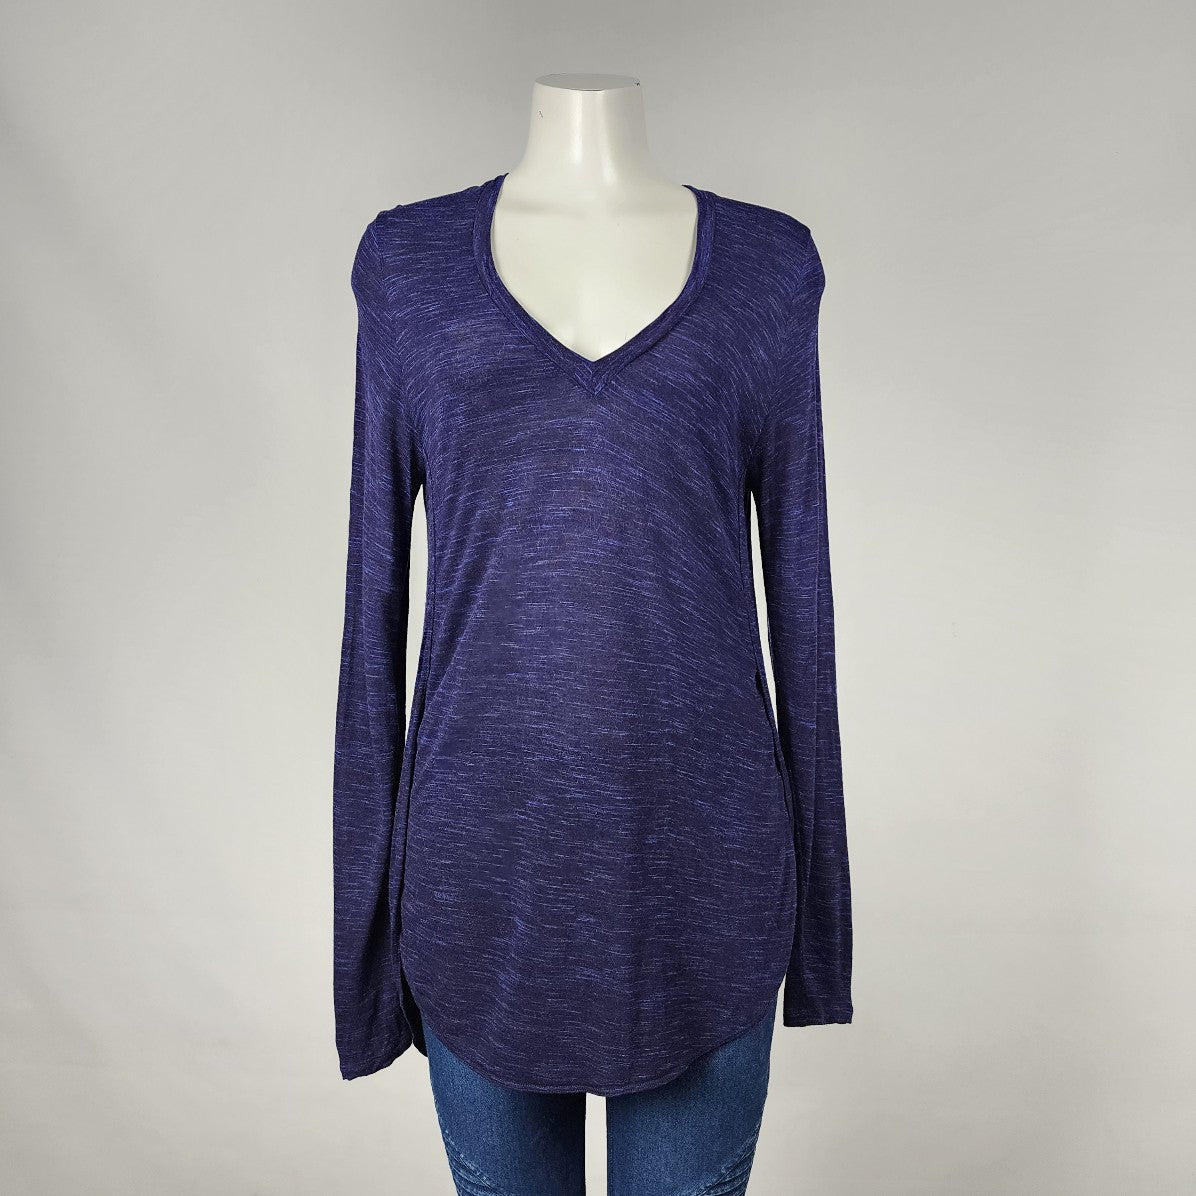 Wilfred Blue Long Sleeve Top Size M/L